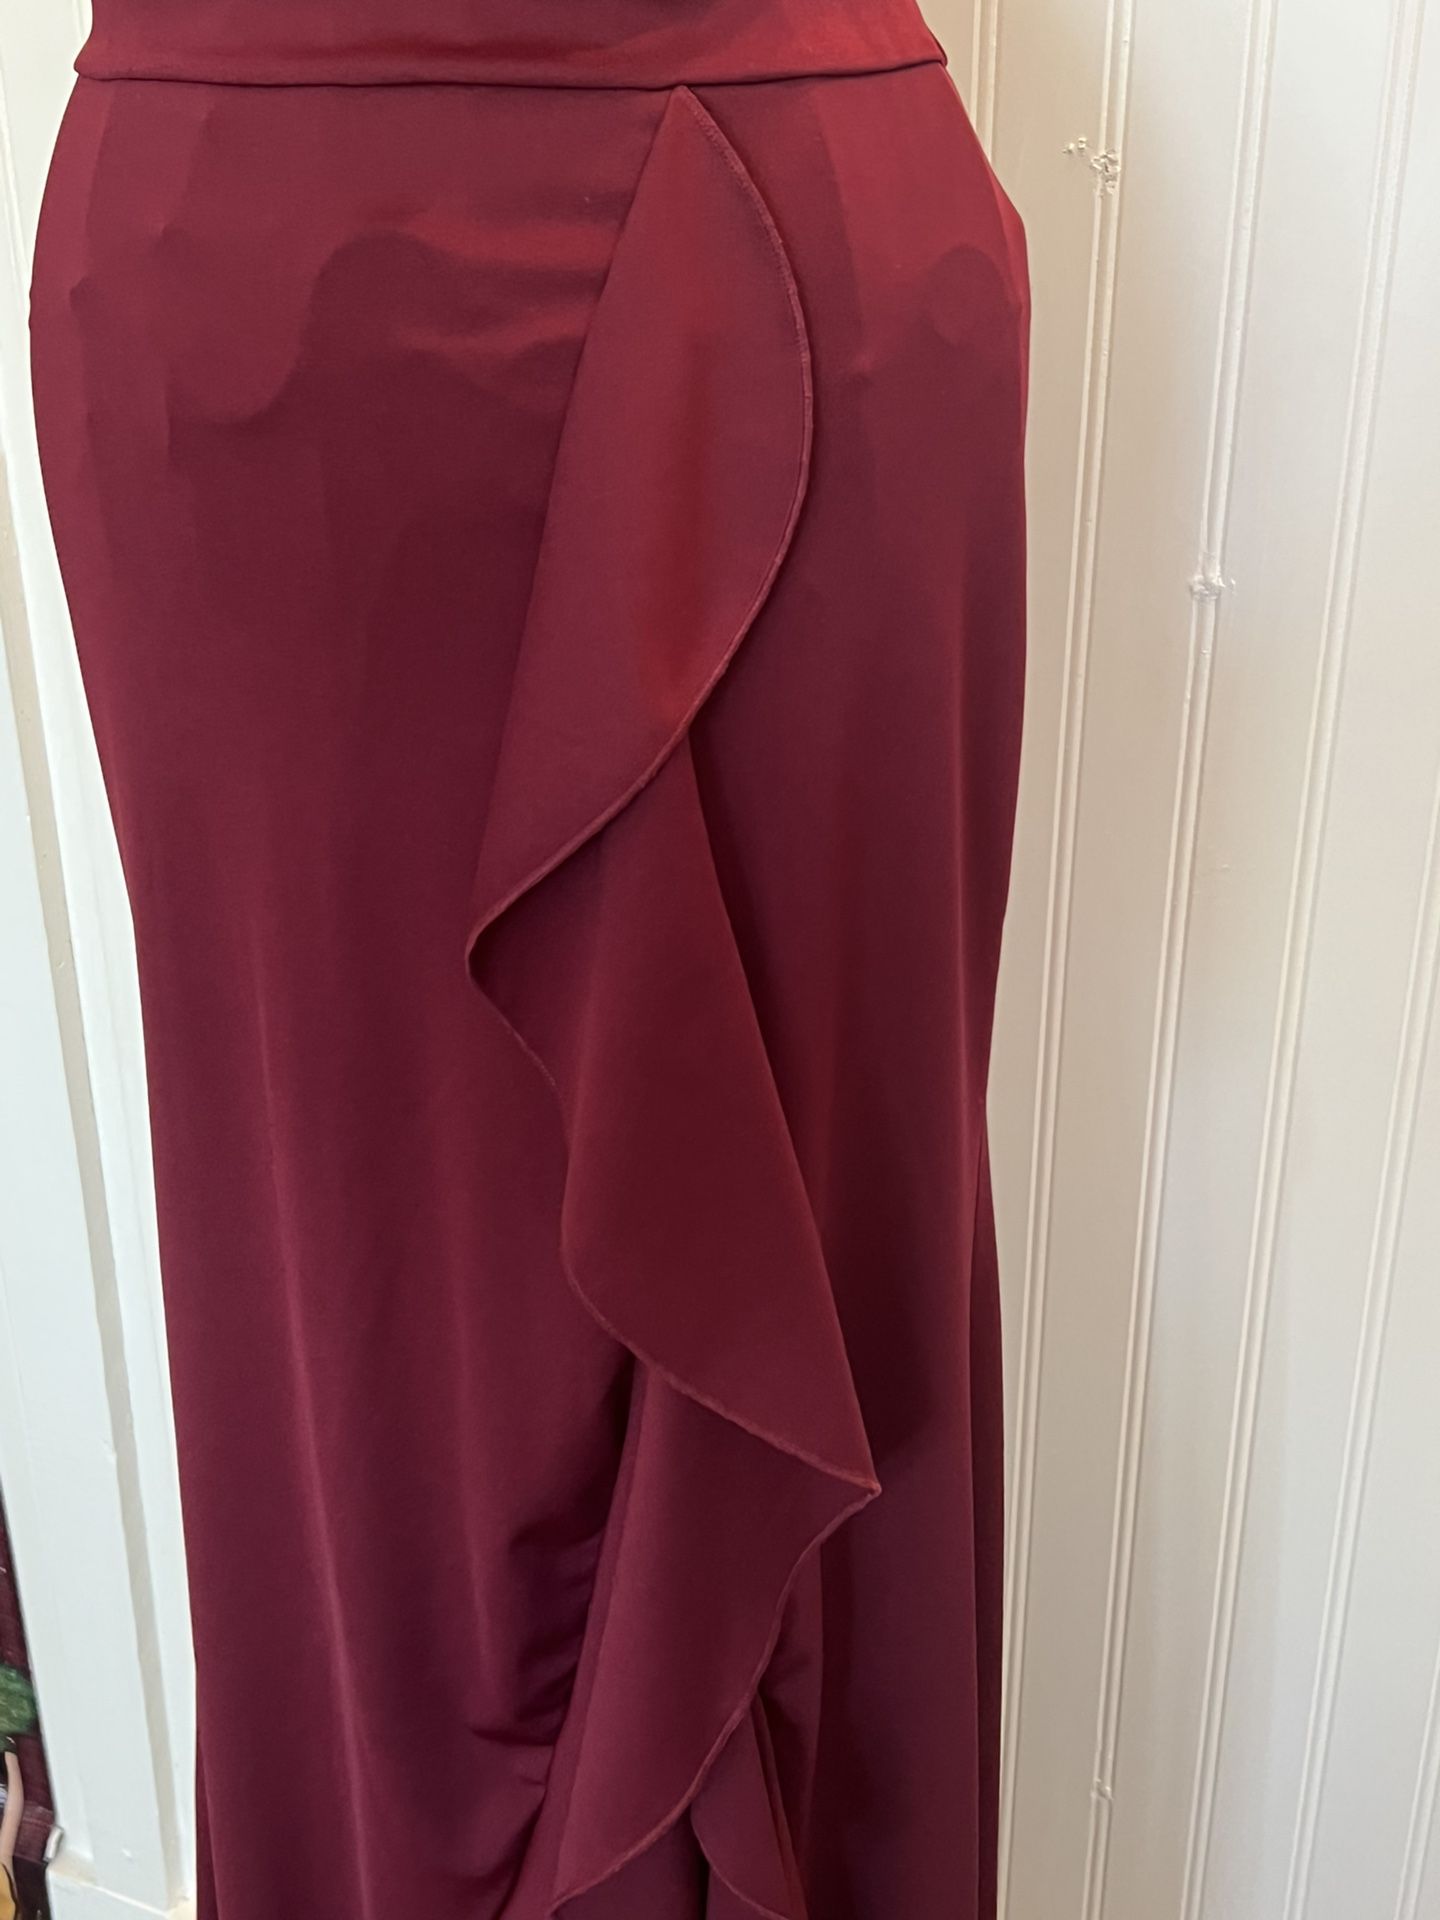 Beautiful wine color party dress Size S The fabric stretches